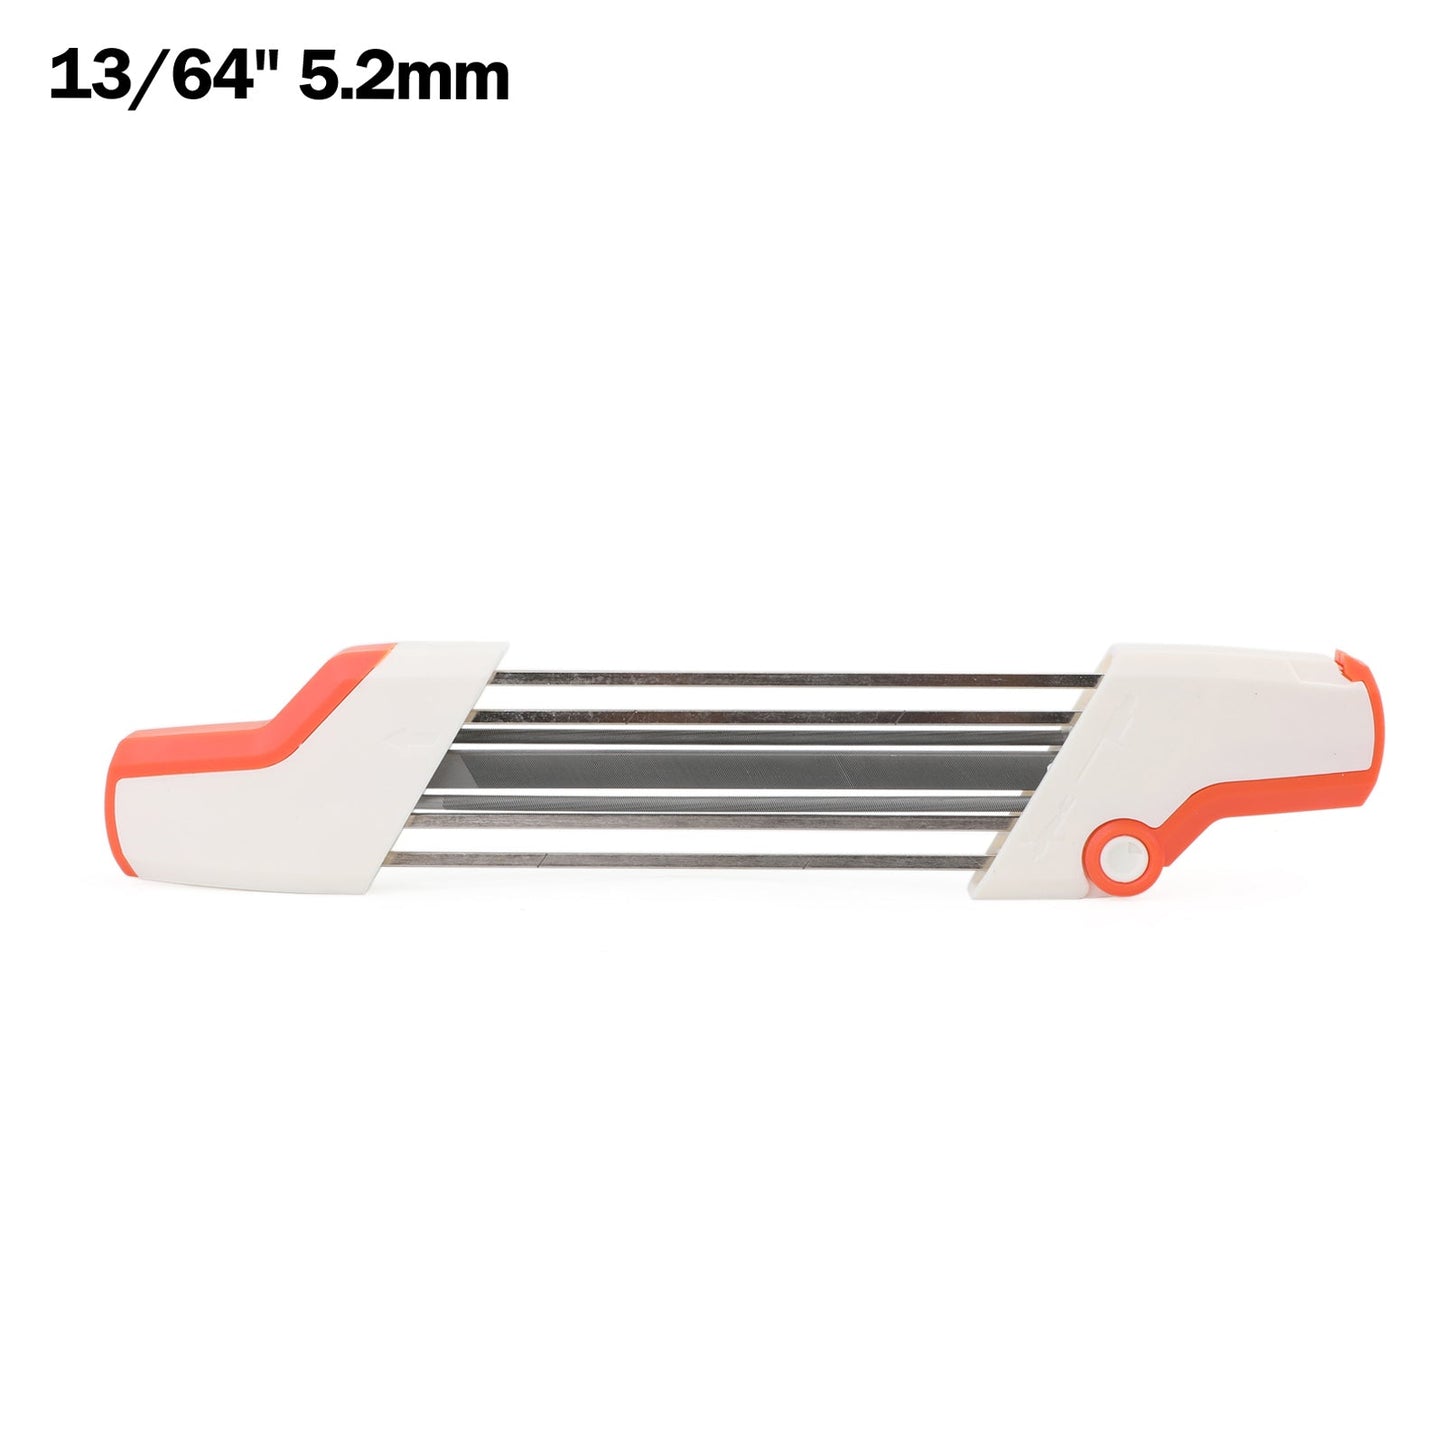 2 In 1 Easy File Chainsaw Chain Sharpening Tool For STIHL 4mm 3/8LP Picco 91 90